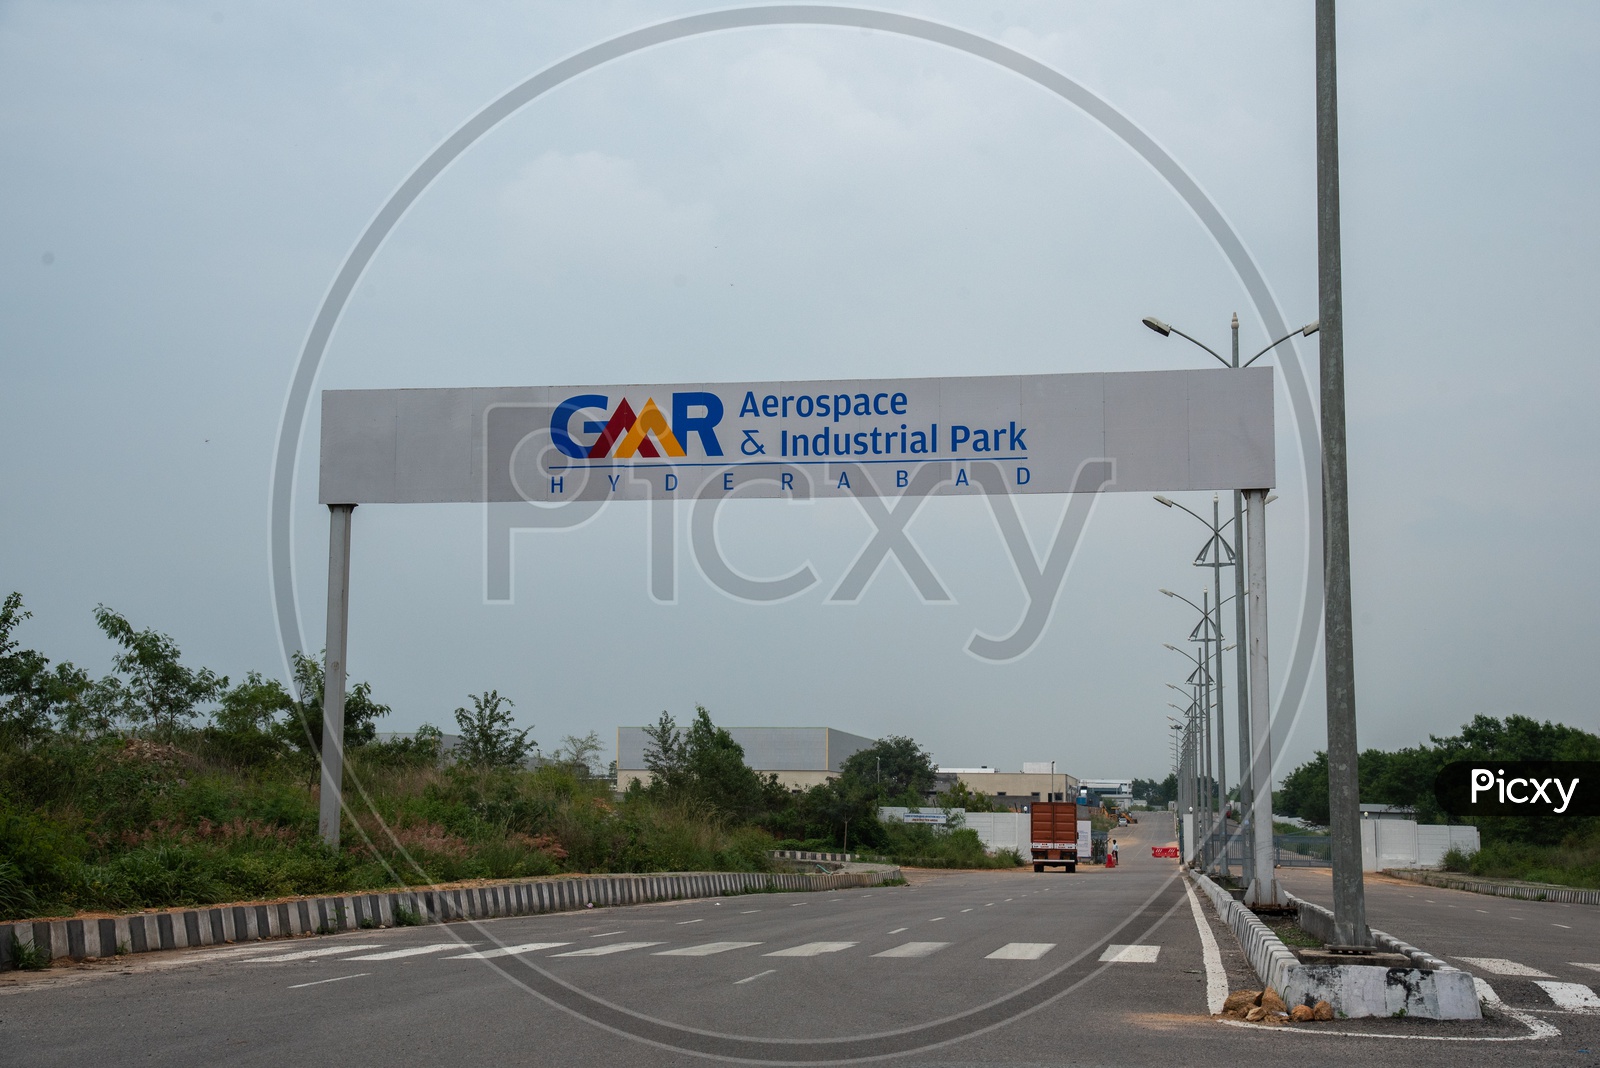 GMR Aerospace and Industrial Park, Hyderabad